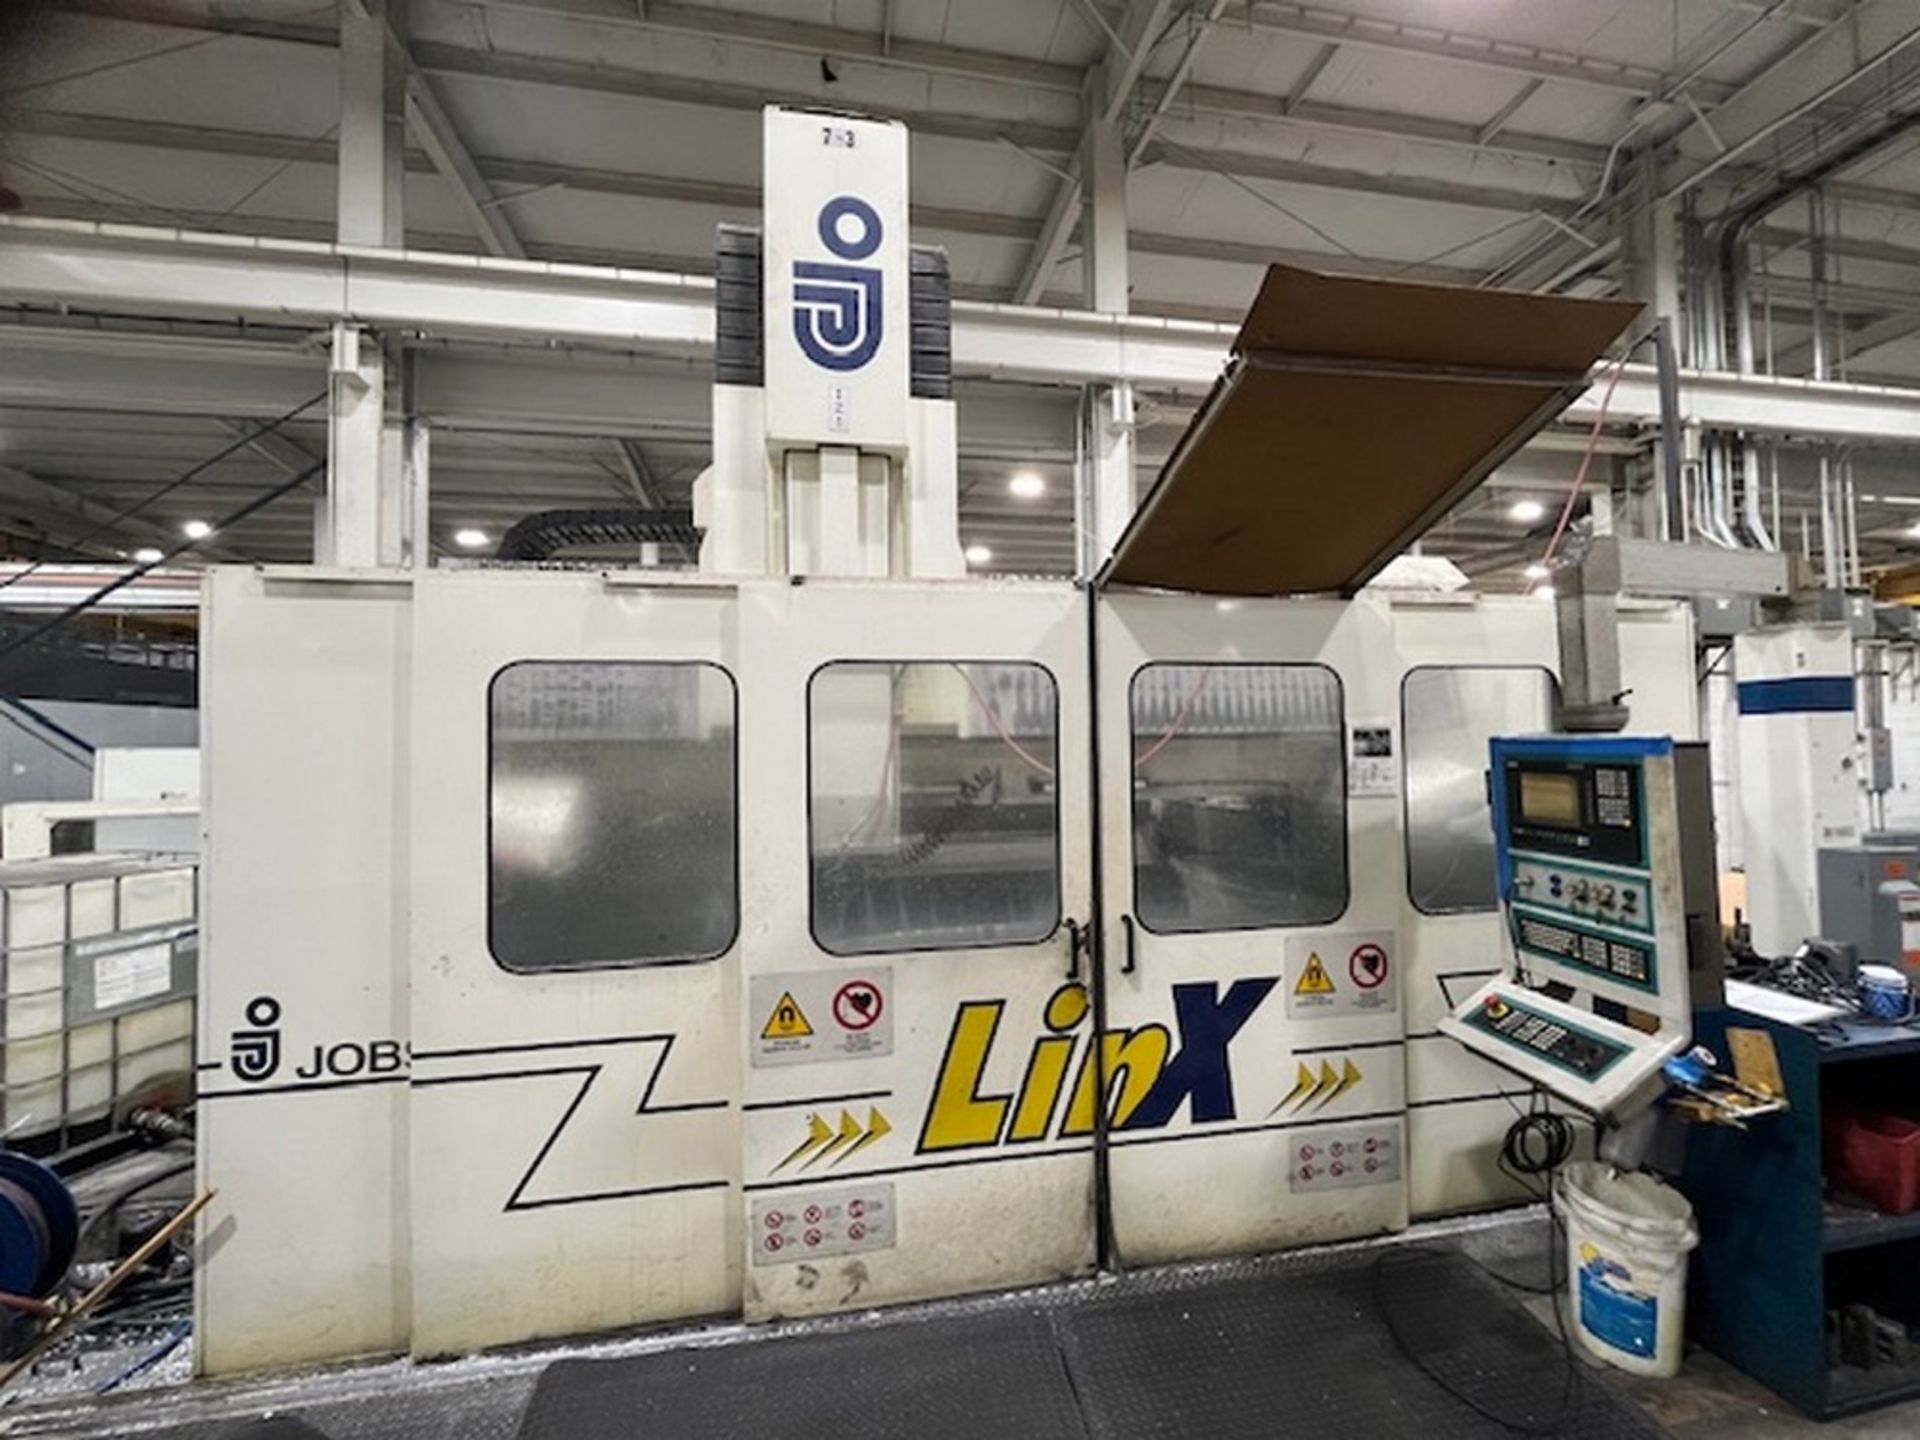 1990 JOBS LINX Machining Center,86" X 125" X 49" Travels, 24,000 RPM HSK Spindle, 20 Station ATC,